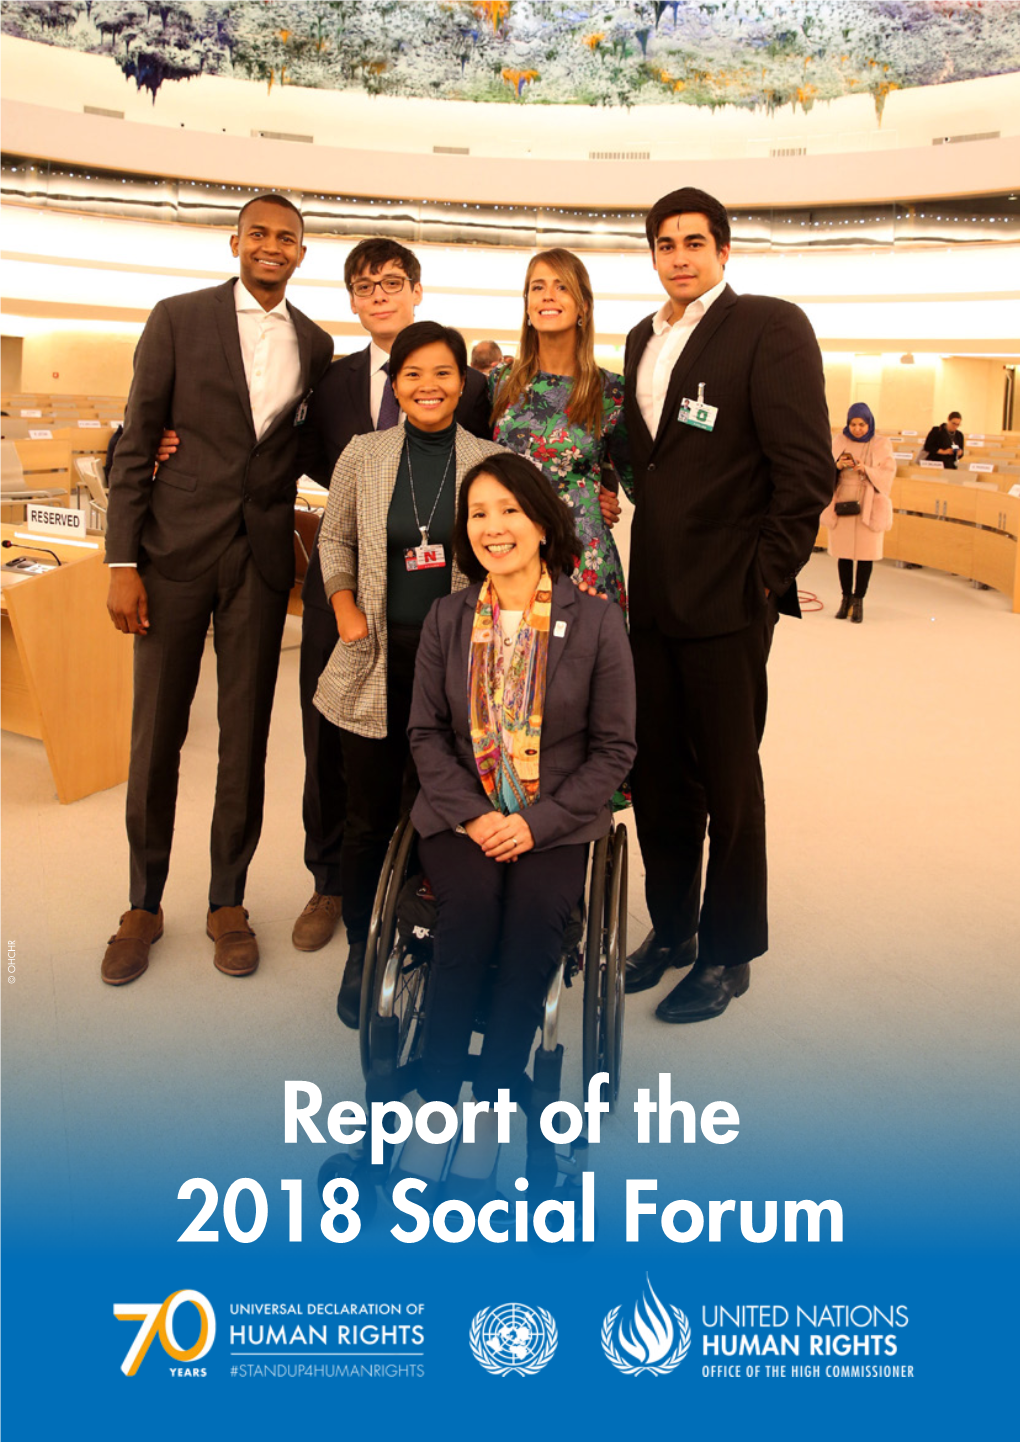 Report of the 2018 Social Forum